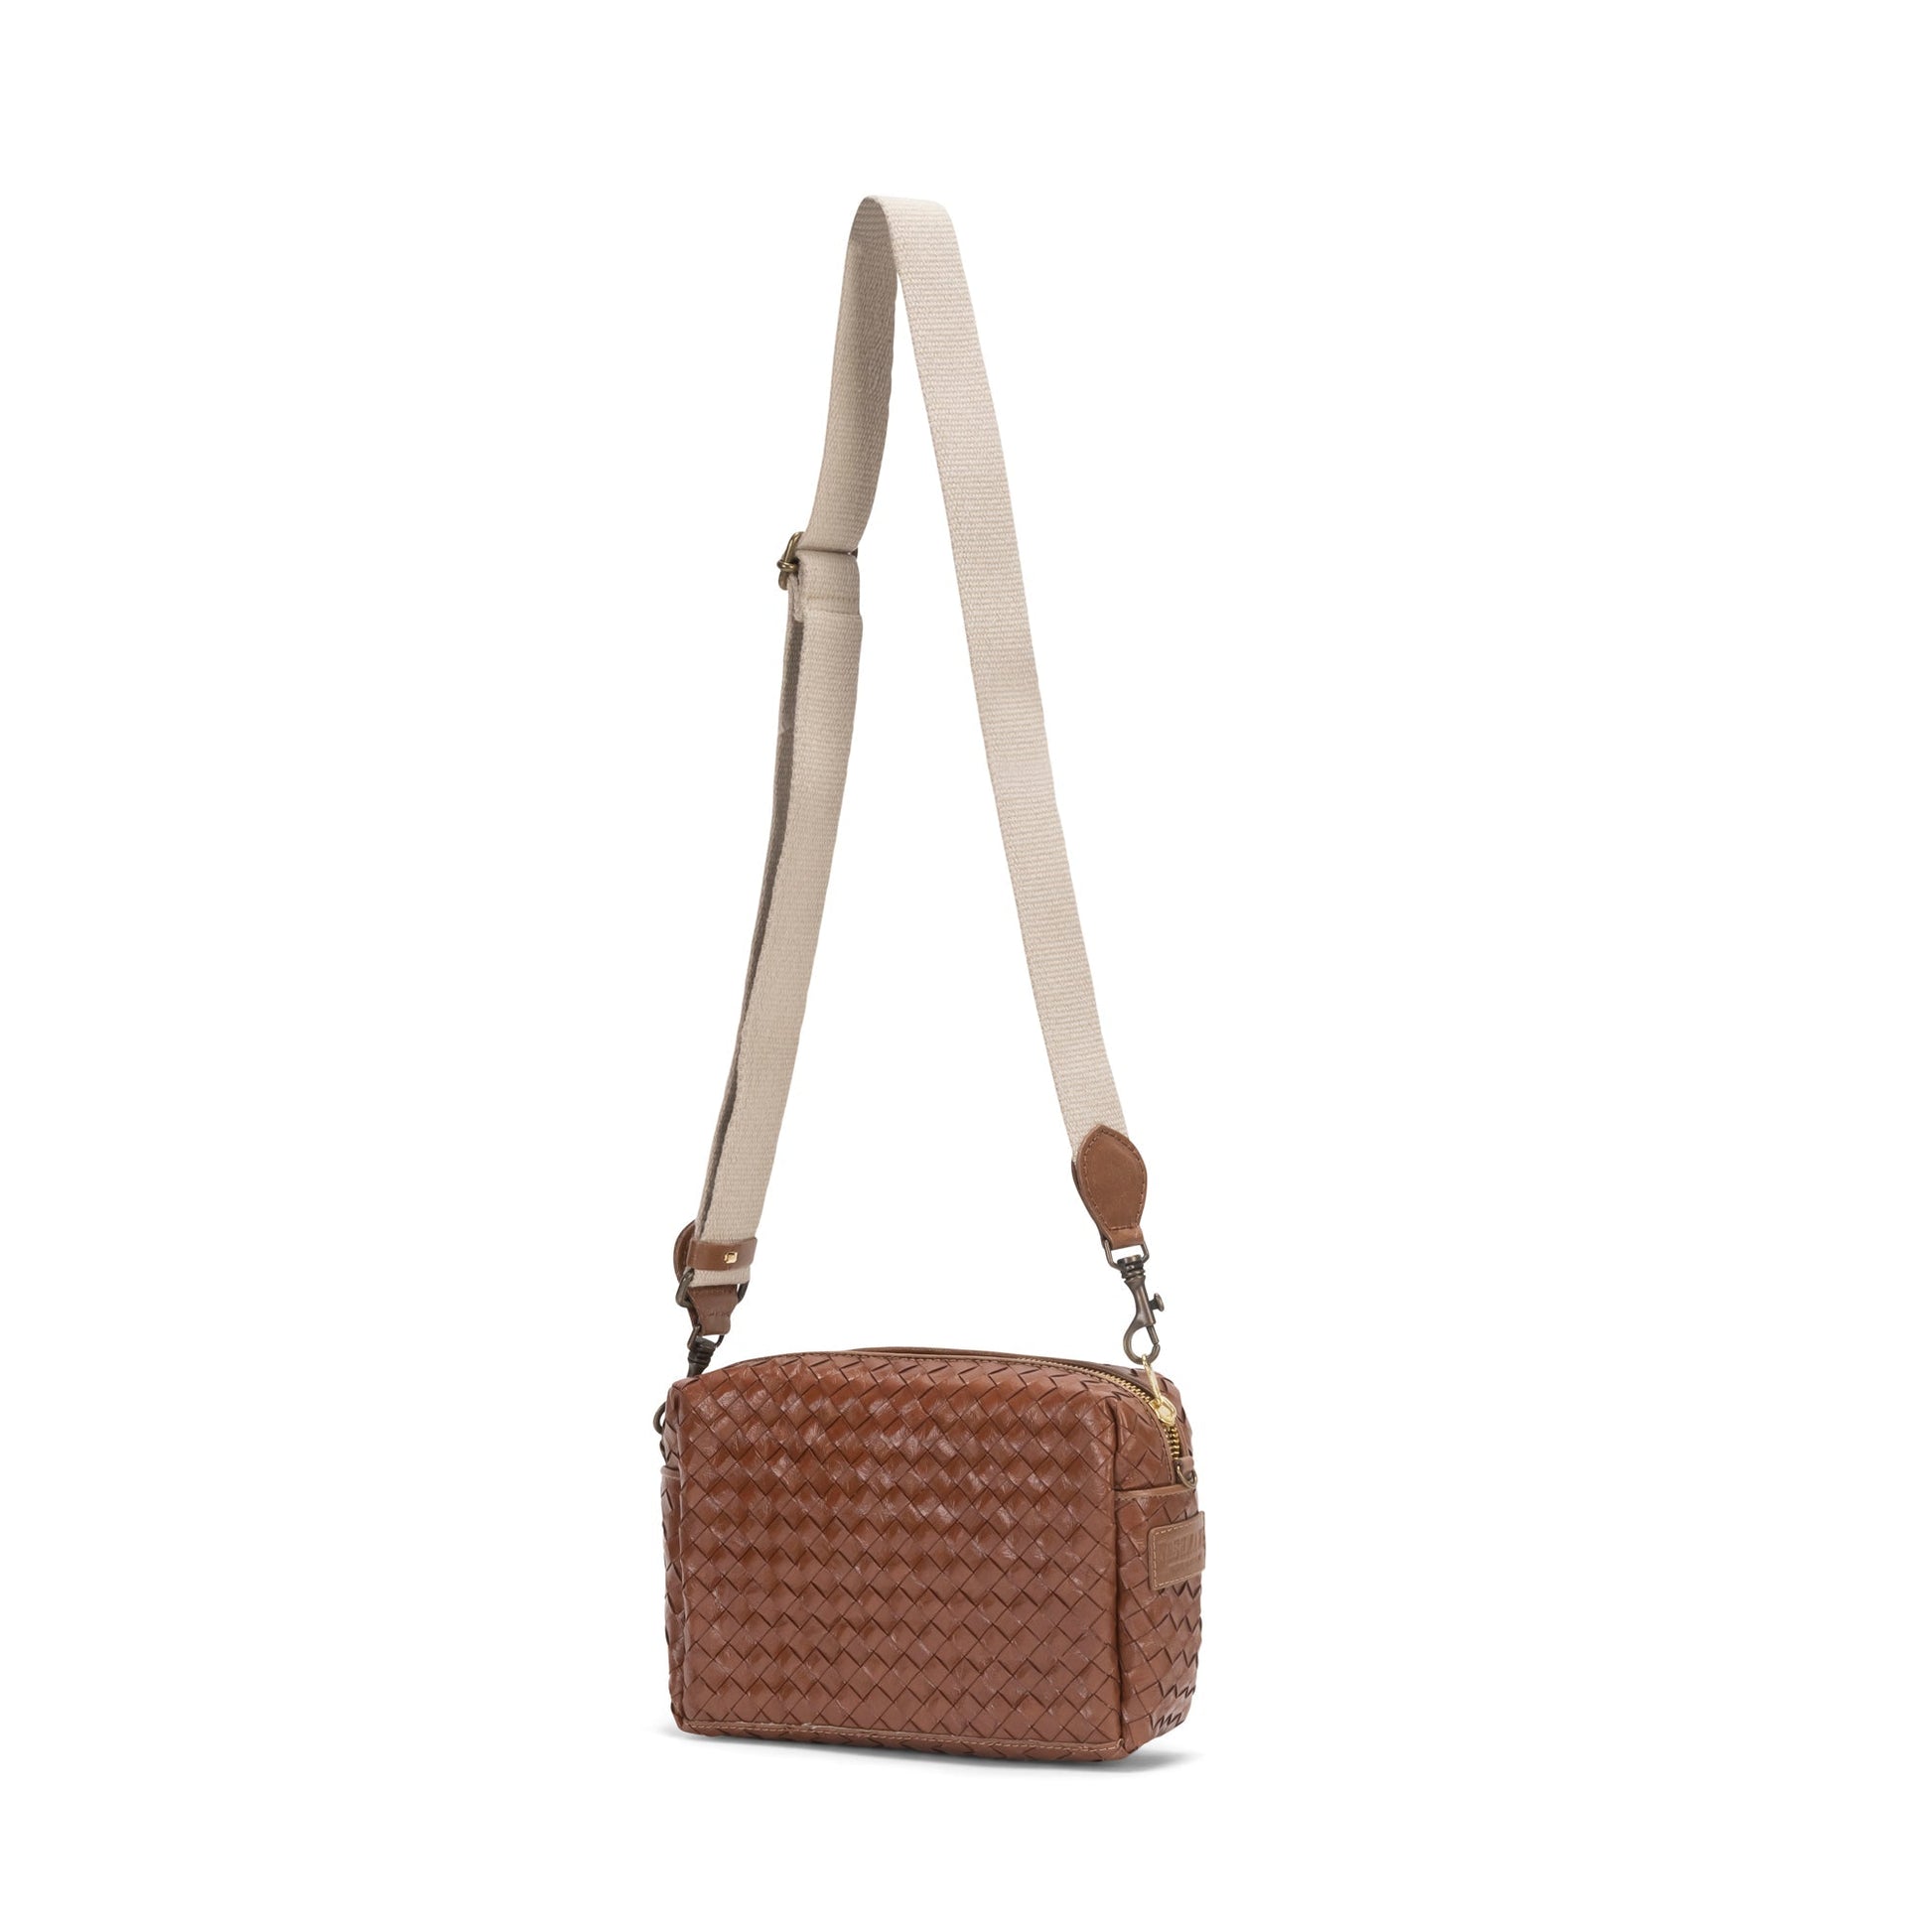 A small woven washable paper handbag is shown. The bag has a wide fabric shoulder strap. The bag is tan in colour and the strap is a light wheat colour.